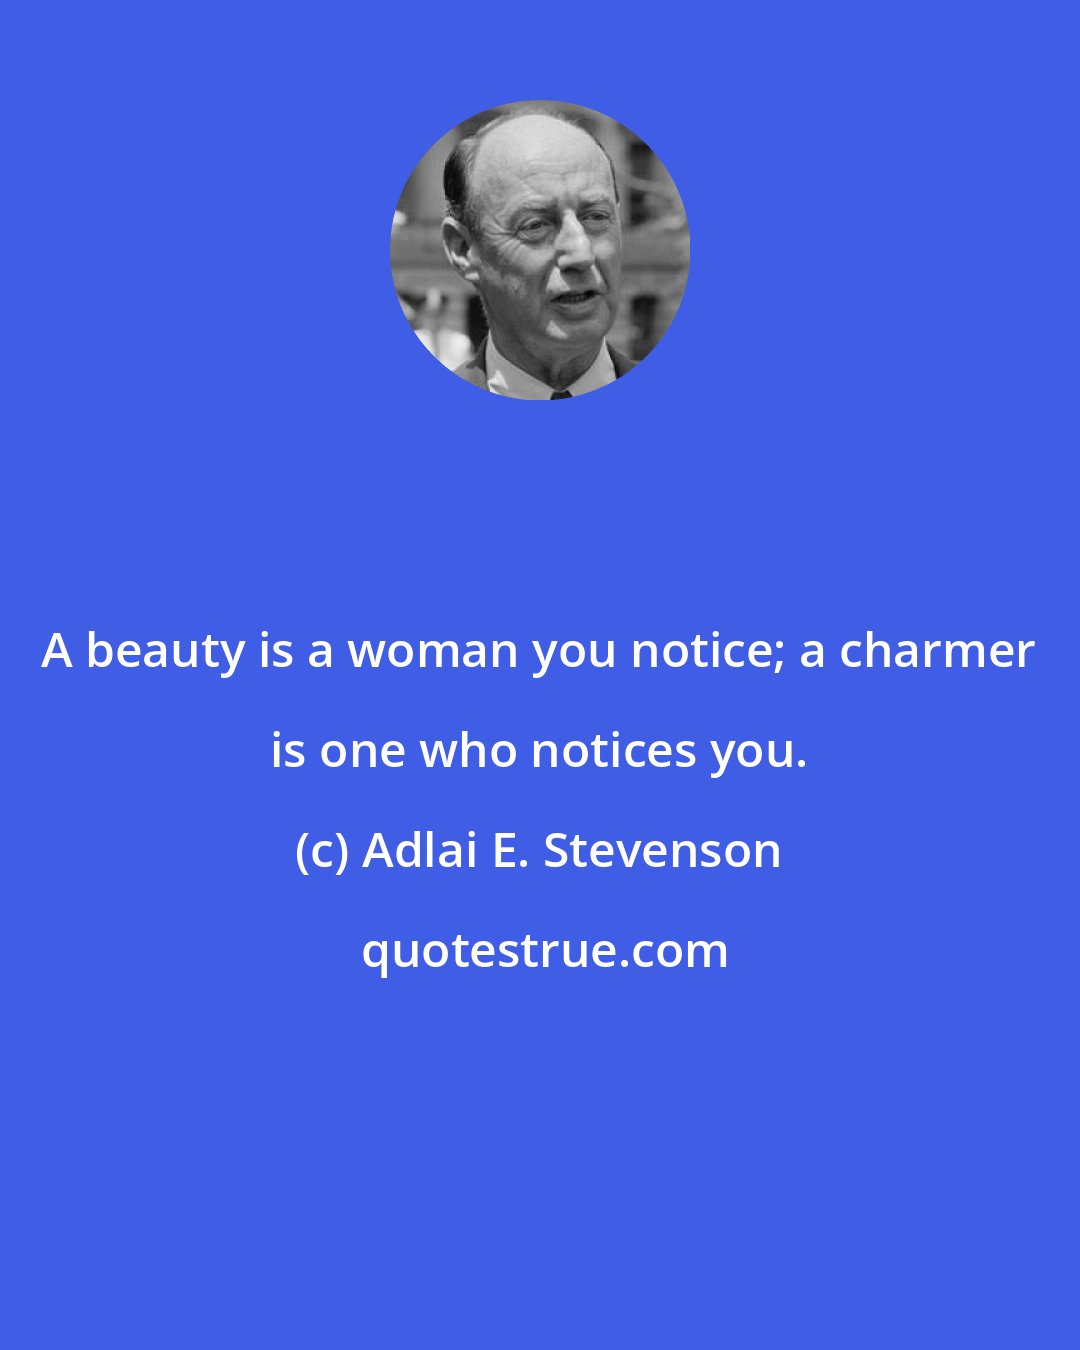 Adlai E. Stevenson: A beauty is a woman you notice; a charmer is one who notices you.